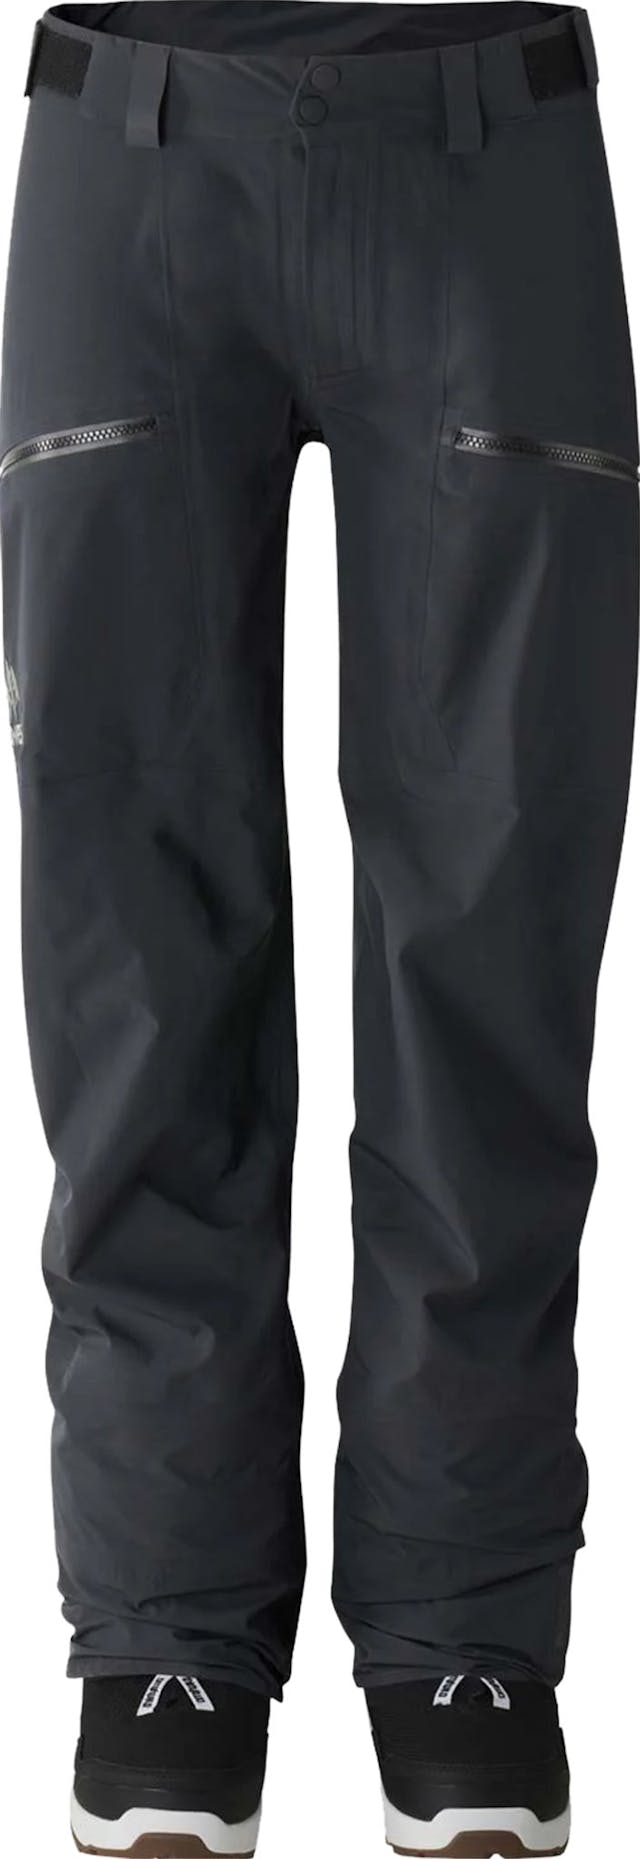 Product image for Shralpinist Stretch Recycled Pants - Women's